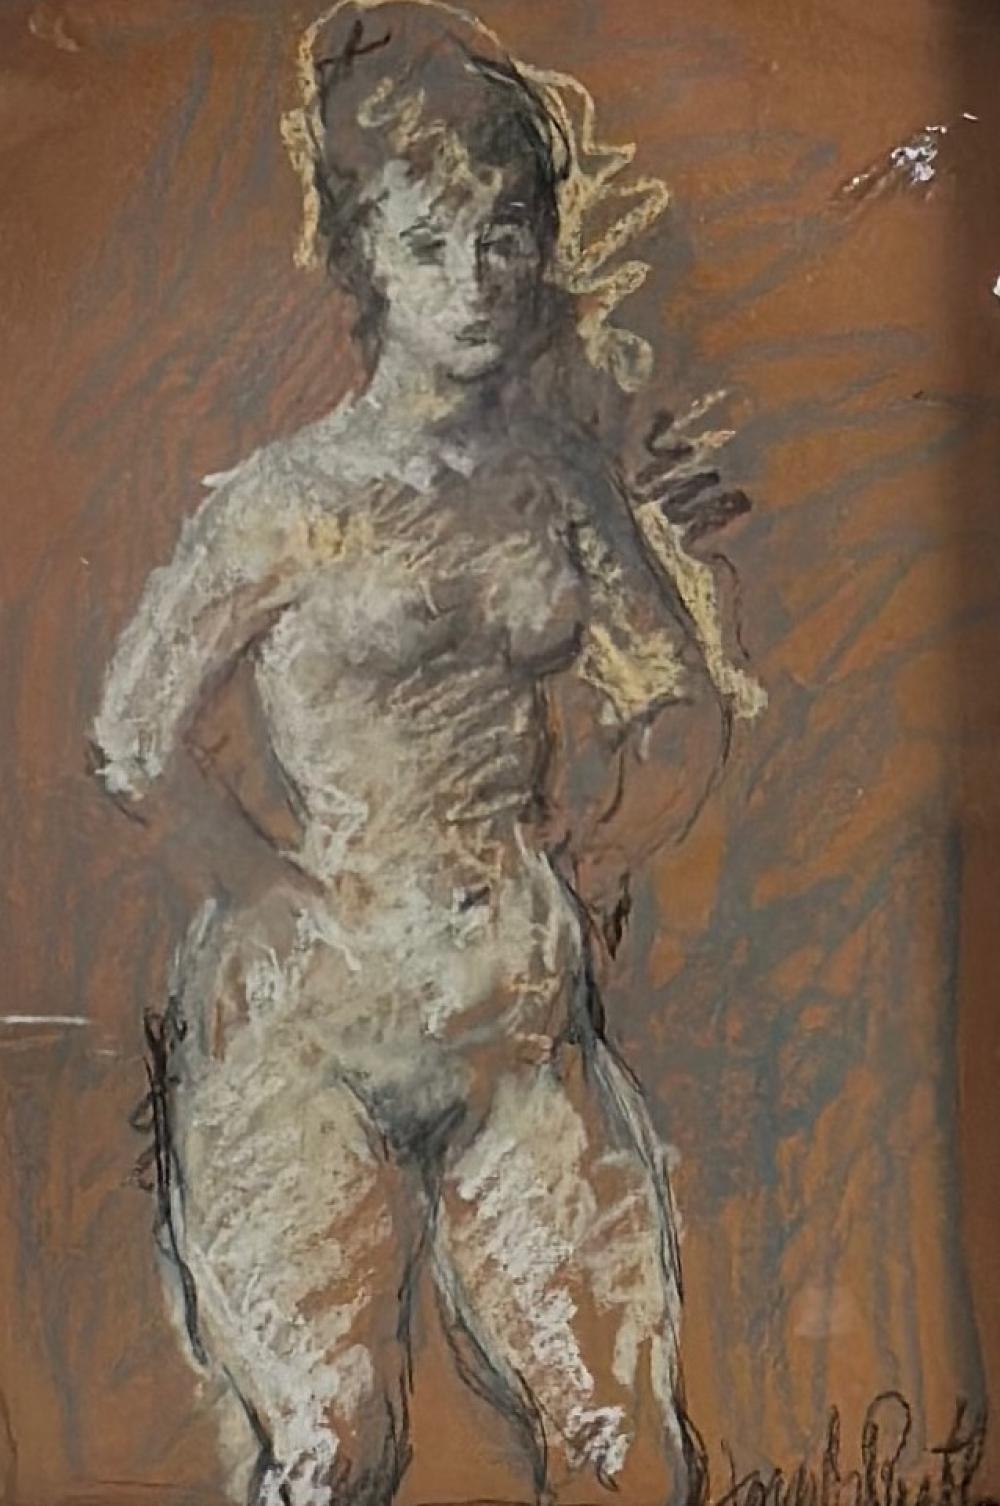 STUDY OF A NUDE WOMAN MID-20TH